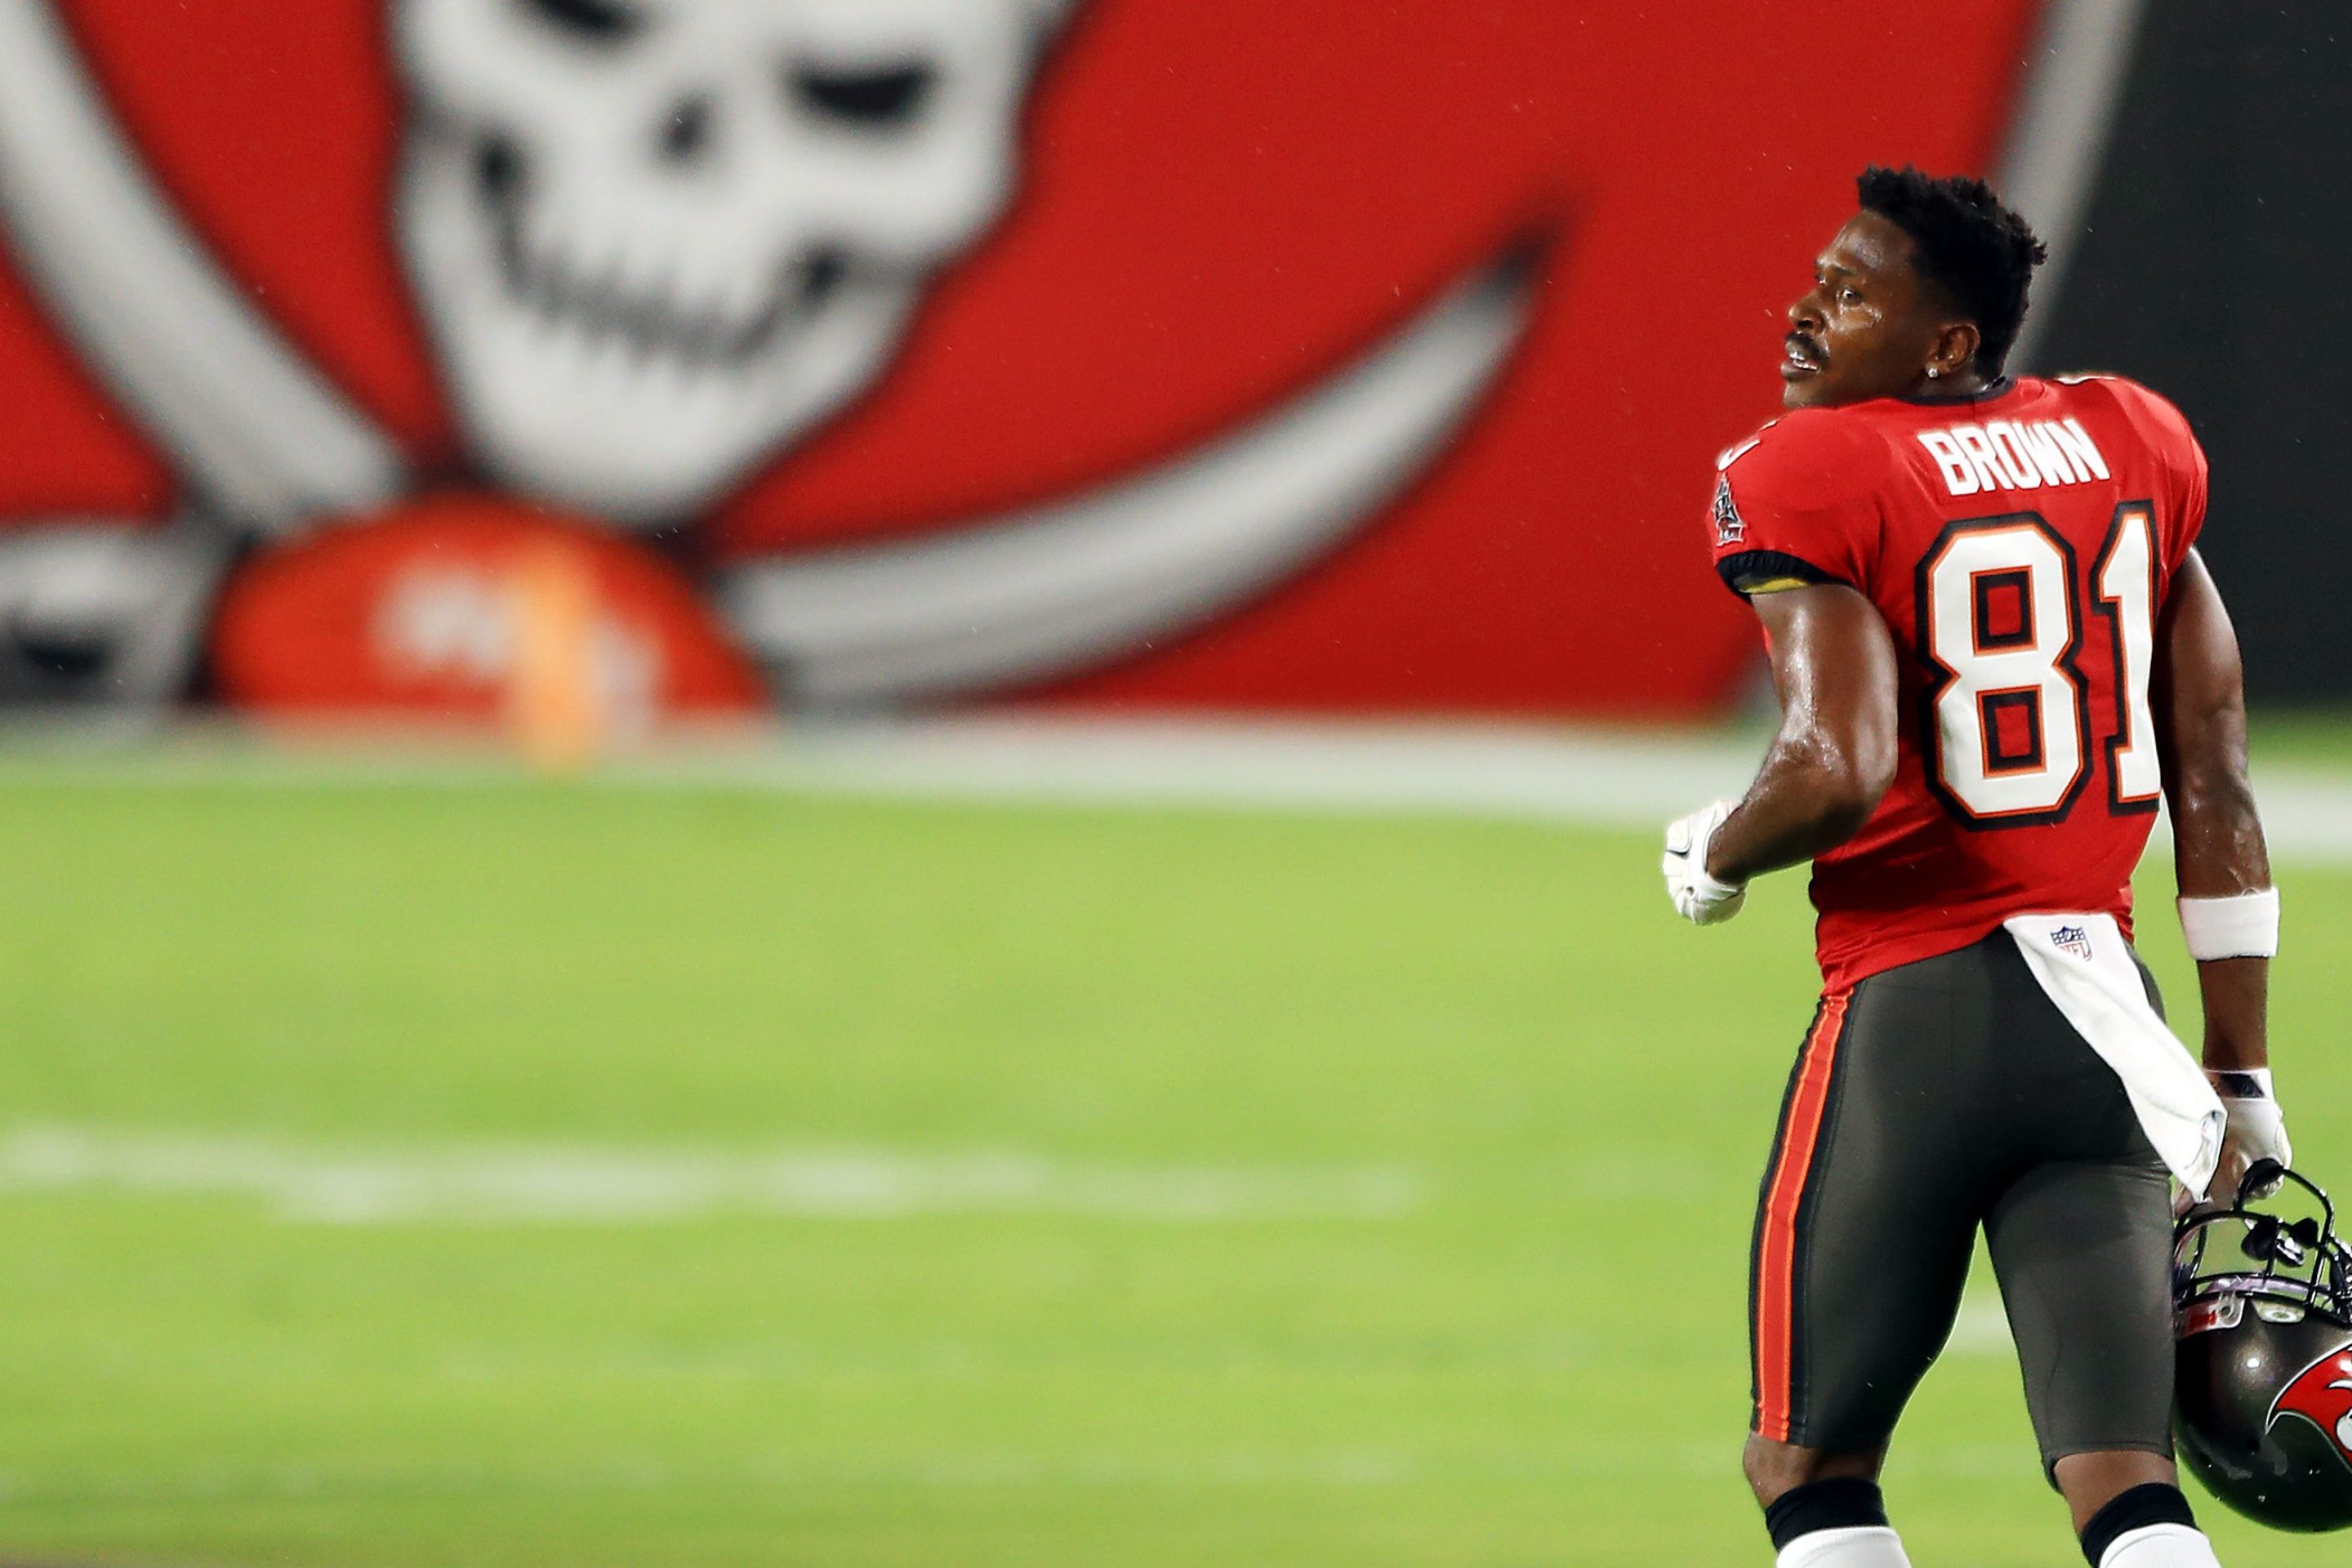 Antonio Brown of the Tampa Bay Buccaneers jogs on the field before the game against the New Orleans Saints at Raymond James Stadium on November 08, 2020 in Tampa, Florida.